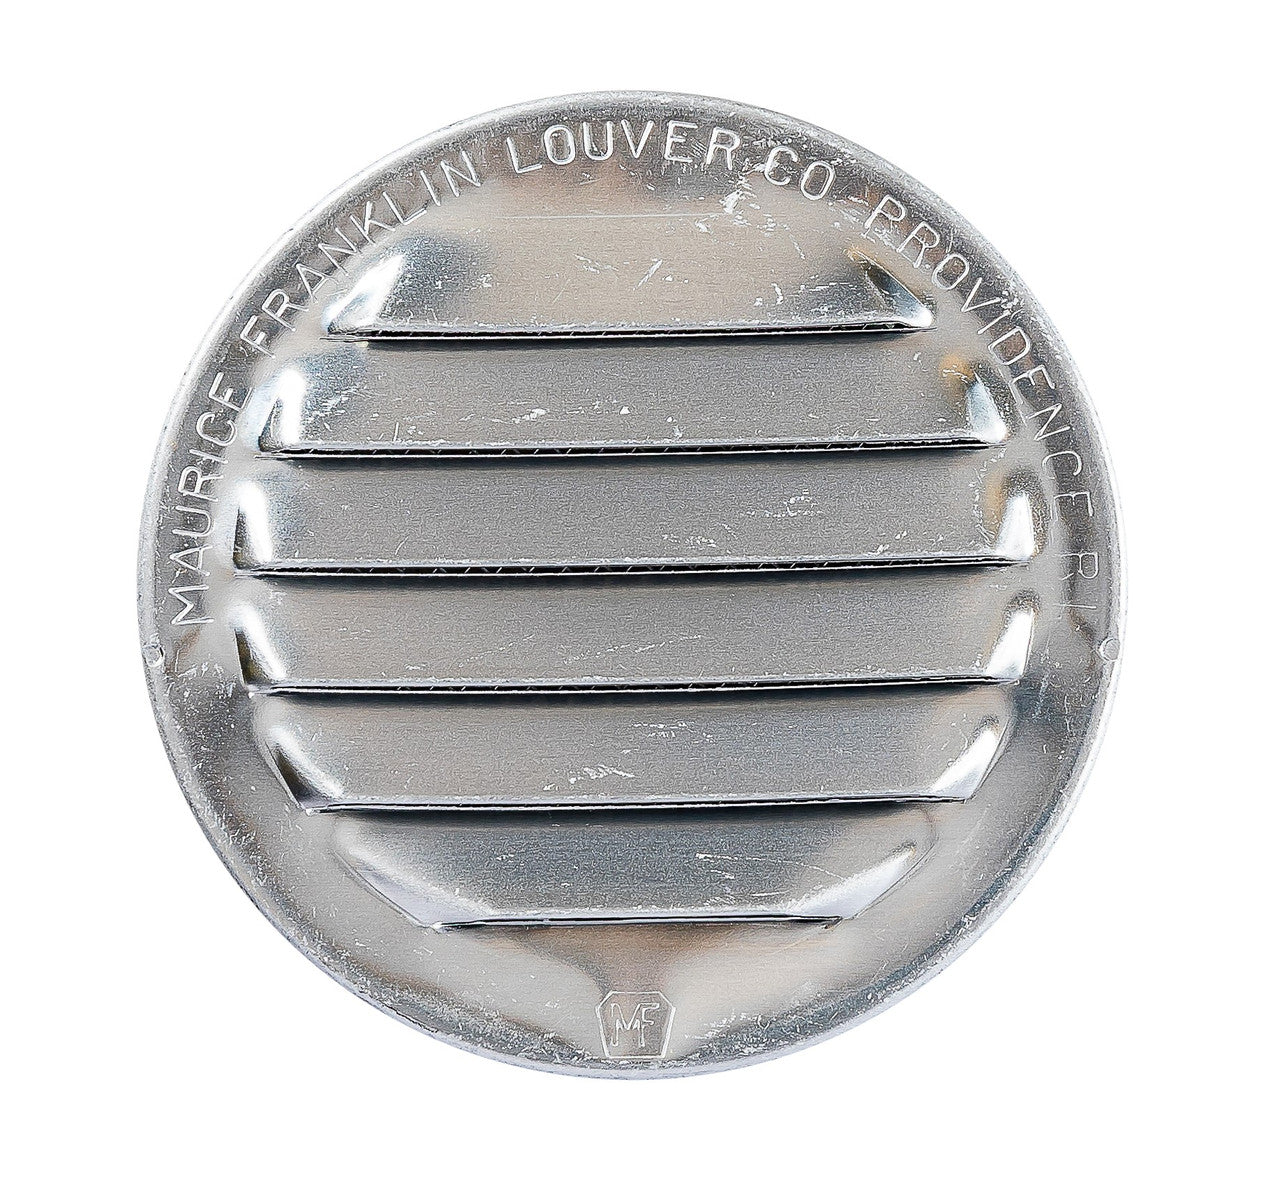 Maurice Franklin Louver 3" Round Aluminum Louver with Insect Screen (Priced Per Bag of 4). Item# 3" RL-100